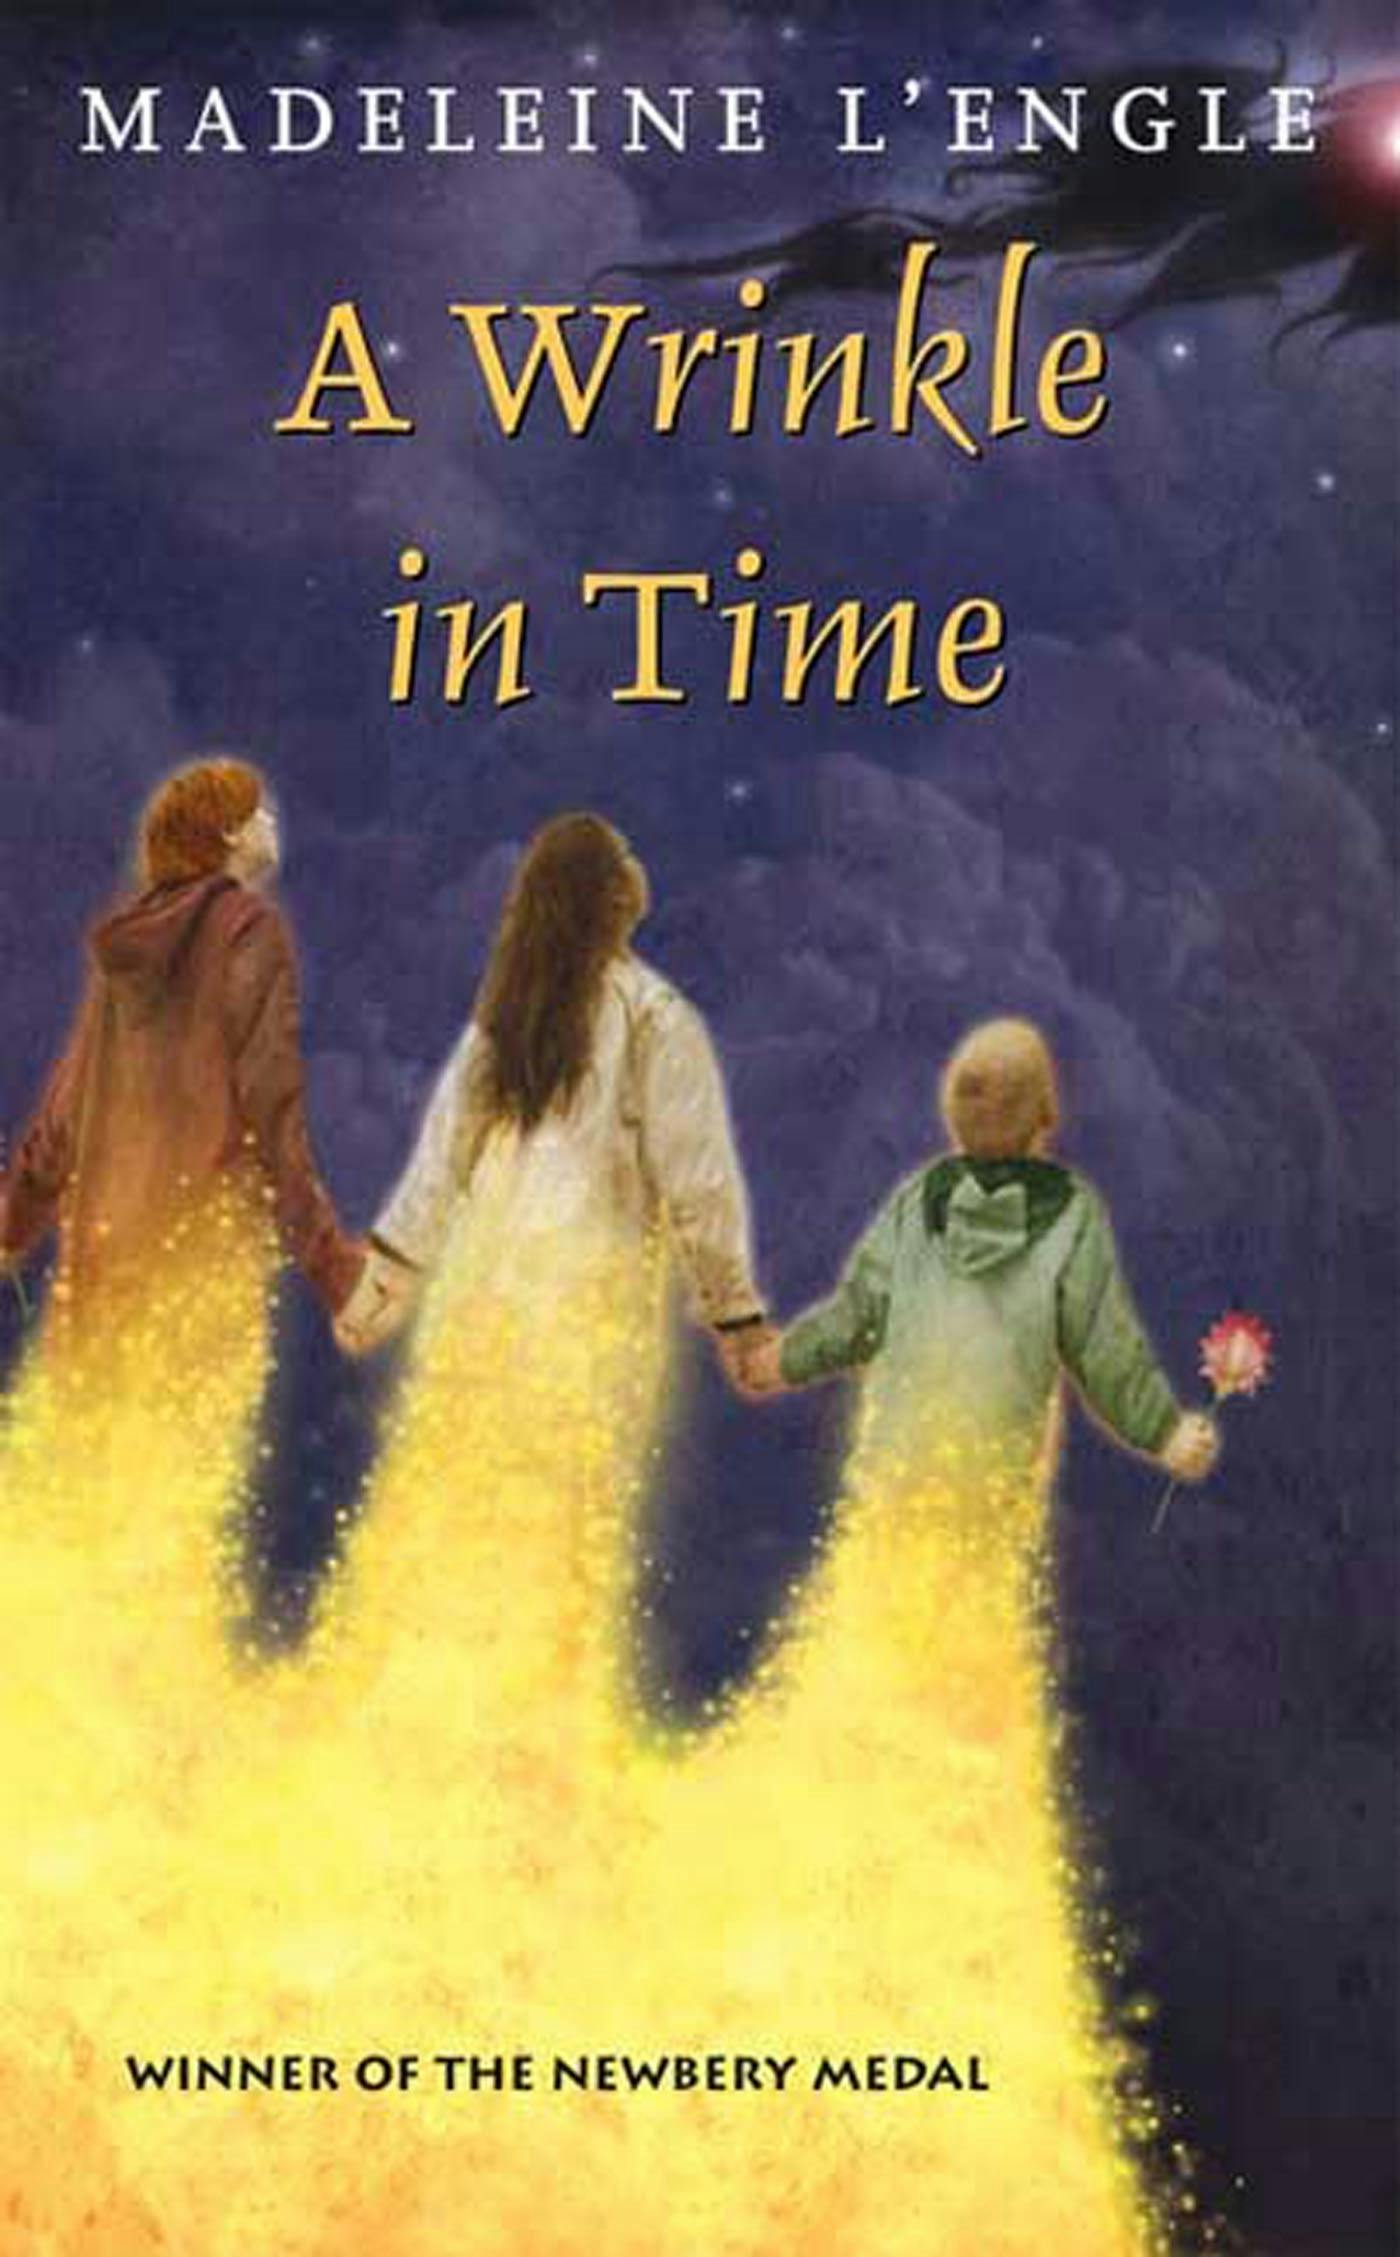 Трещина во времени. Madeleine l'Engle Wrinkle in time a книга. A Wrinkle in time книга.